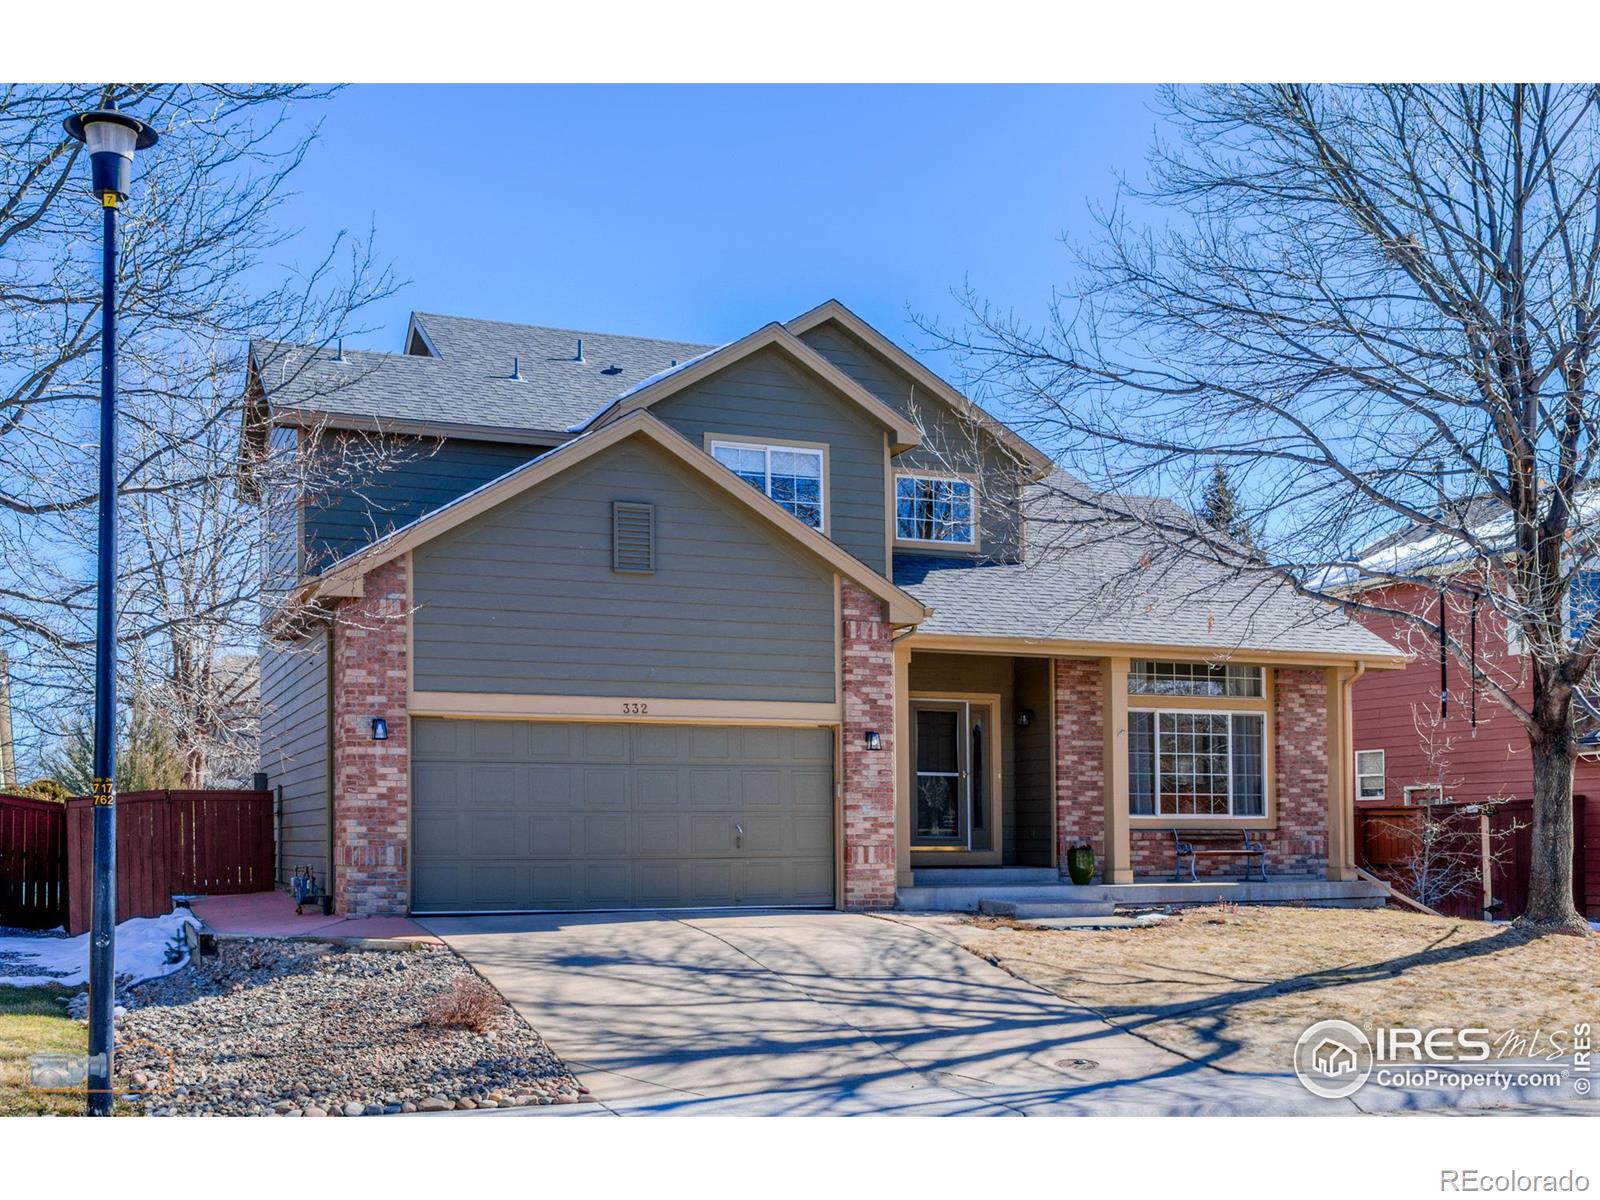 Report Image for 332  Driftwood Circle,Lafayette, Colorado